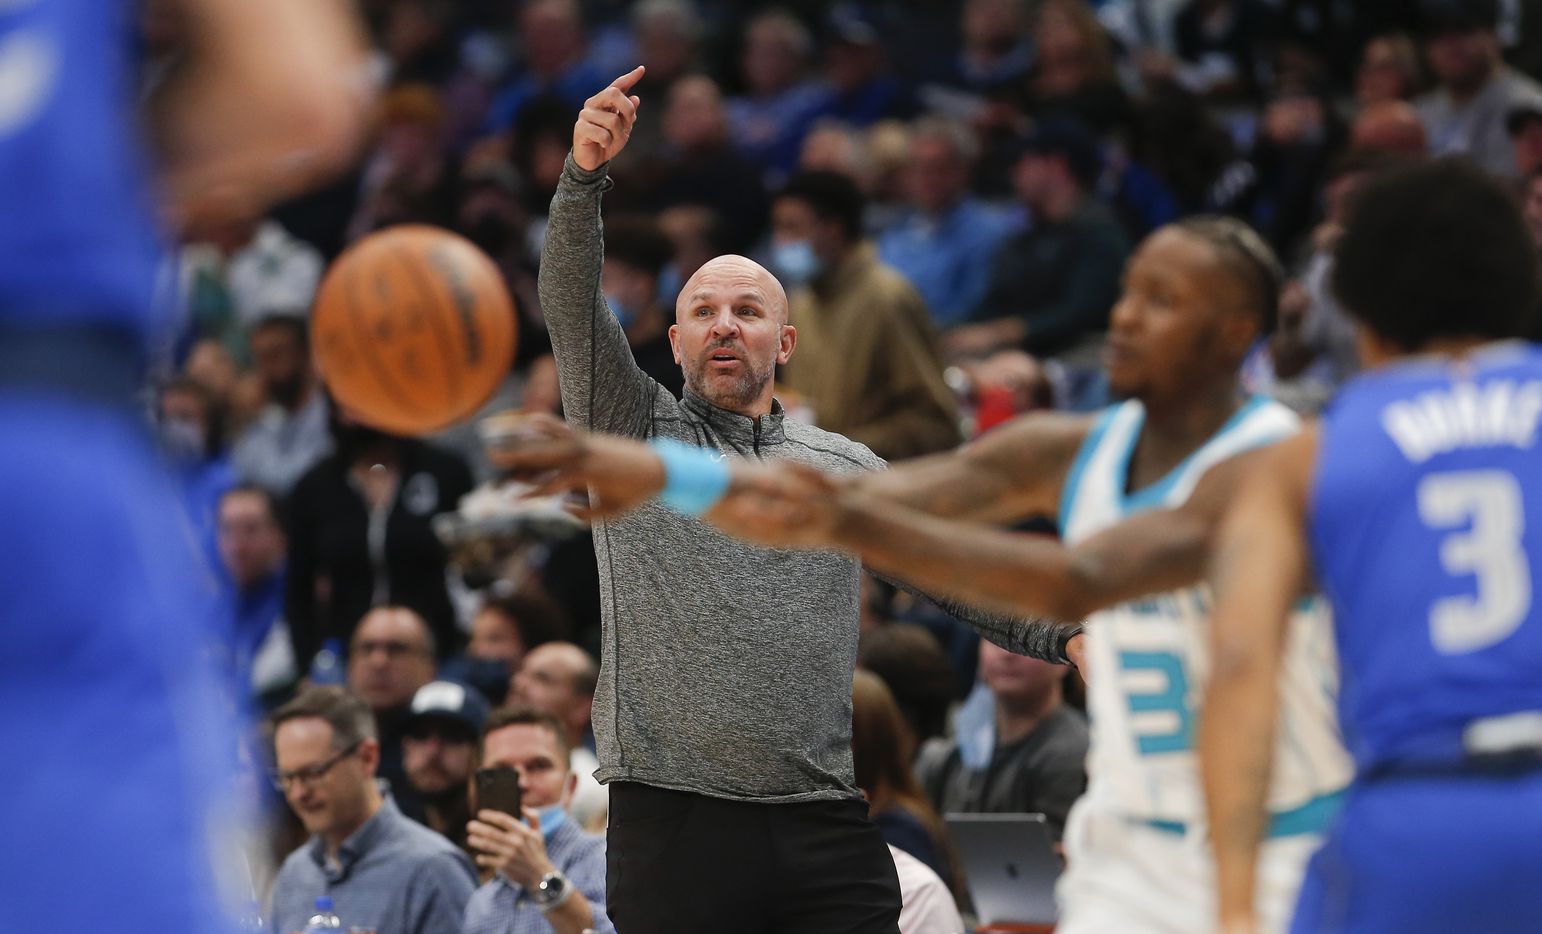 Dallas Mavericks head coach Jason Kidd shouts instructions to his players during the first half of an NBA basketball game against the Charlotte Hornets in Dallas, Monday, December 13, 2021. (Brandon Wade/Special Contributor)